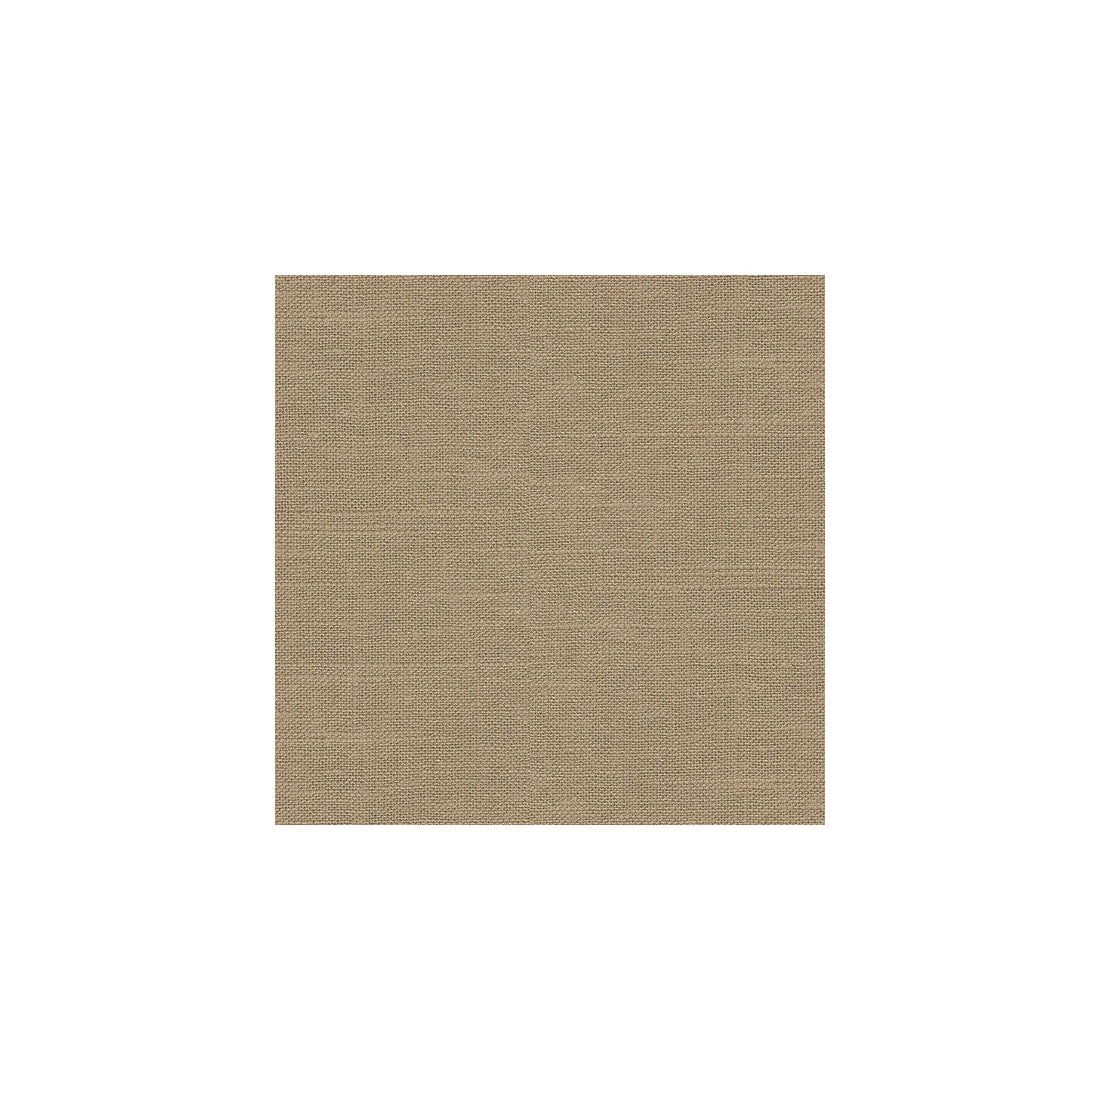 Barnegat fabric in sand color - pattern 24573.1616.0 - by Kravet Basics in the Perfect Plains collection